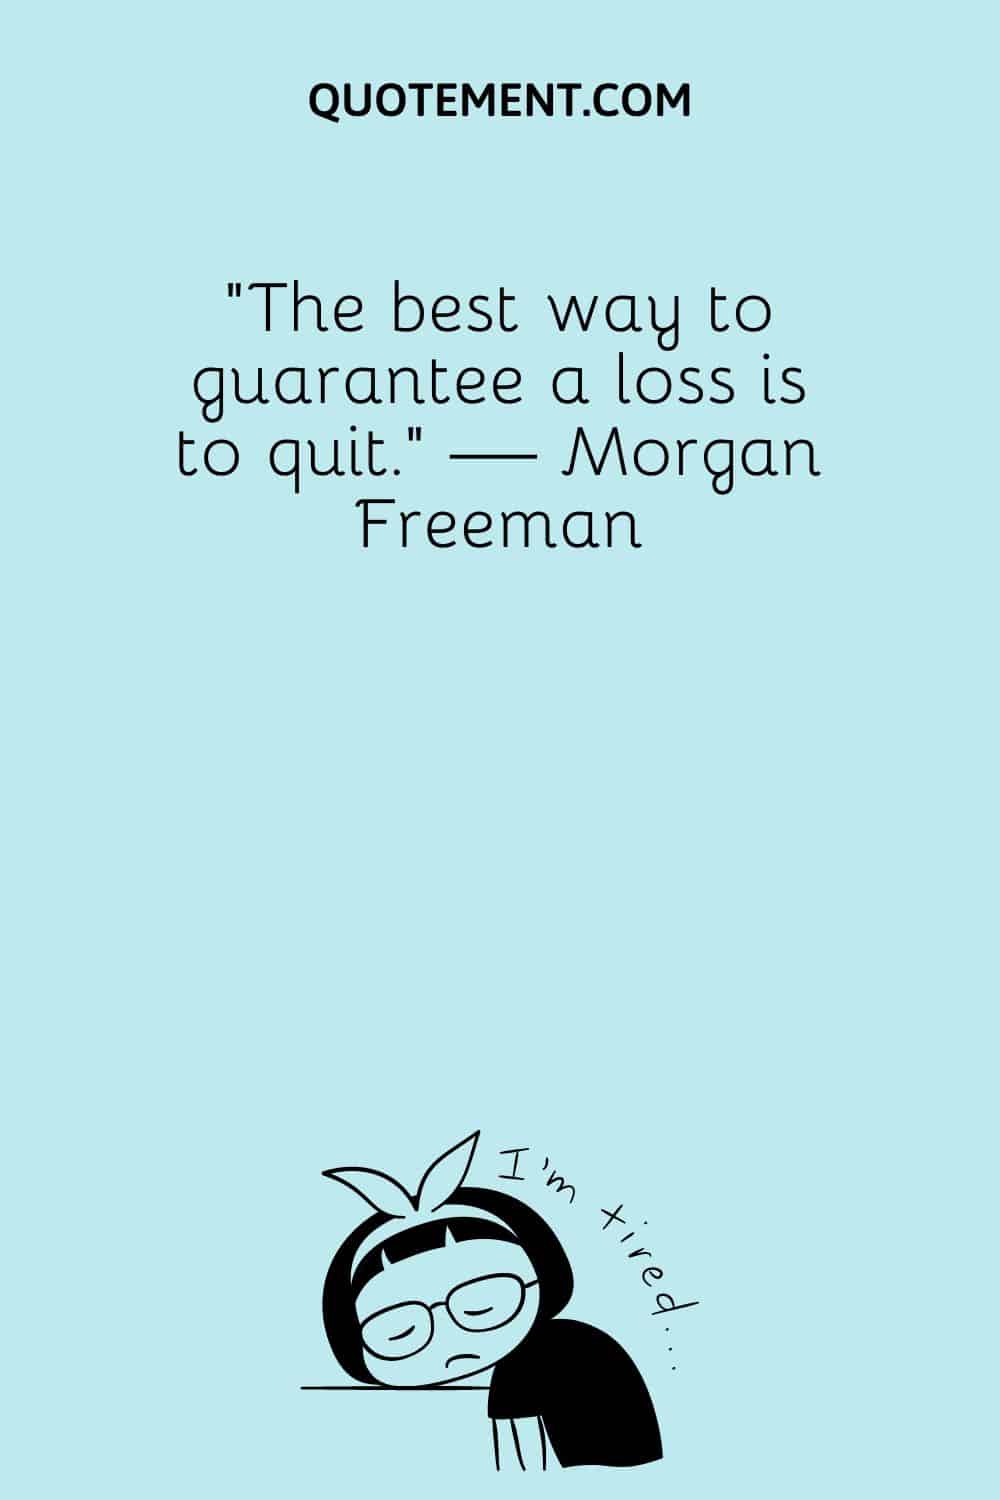 The best way to guarantee a loss is to quit.